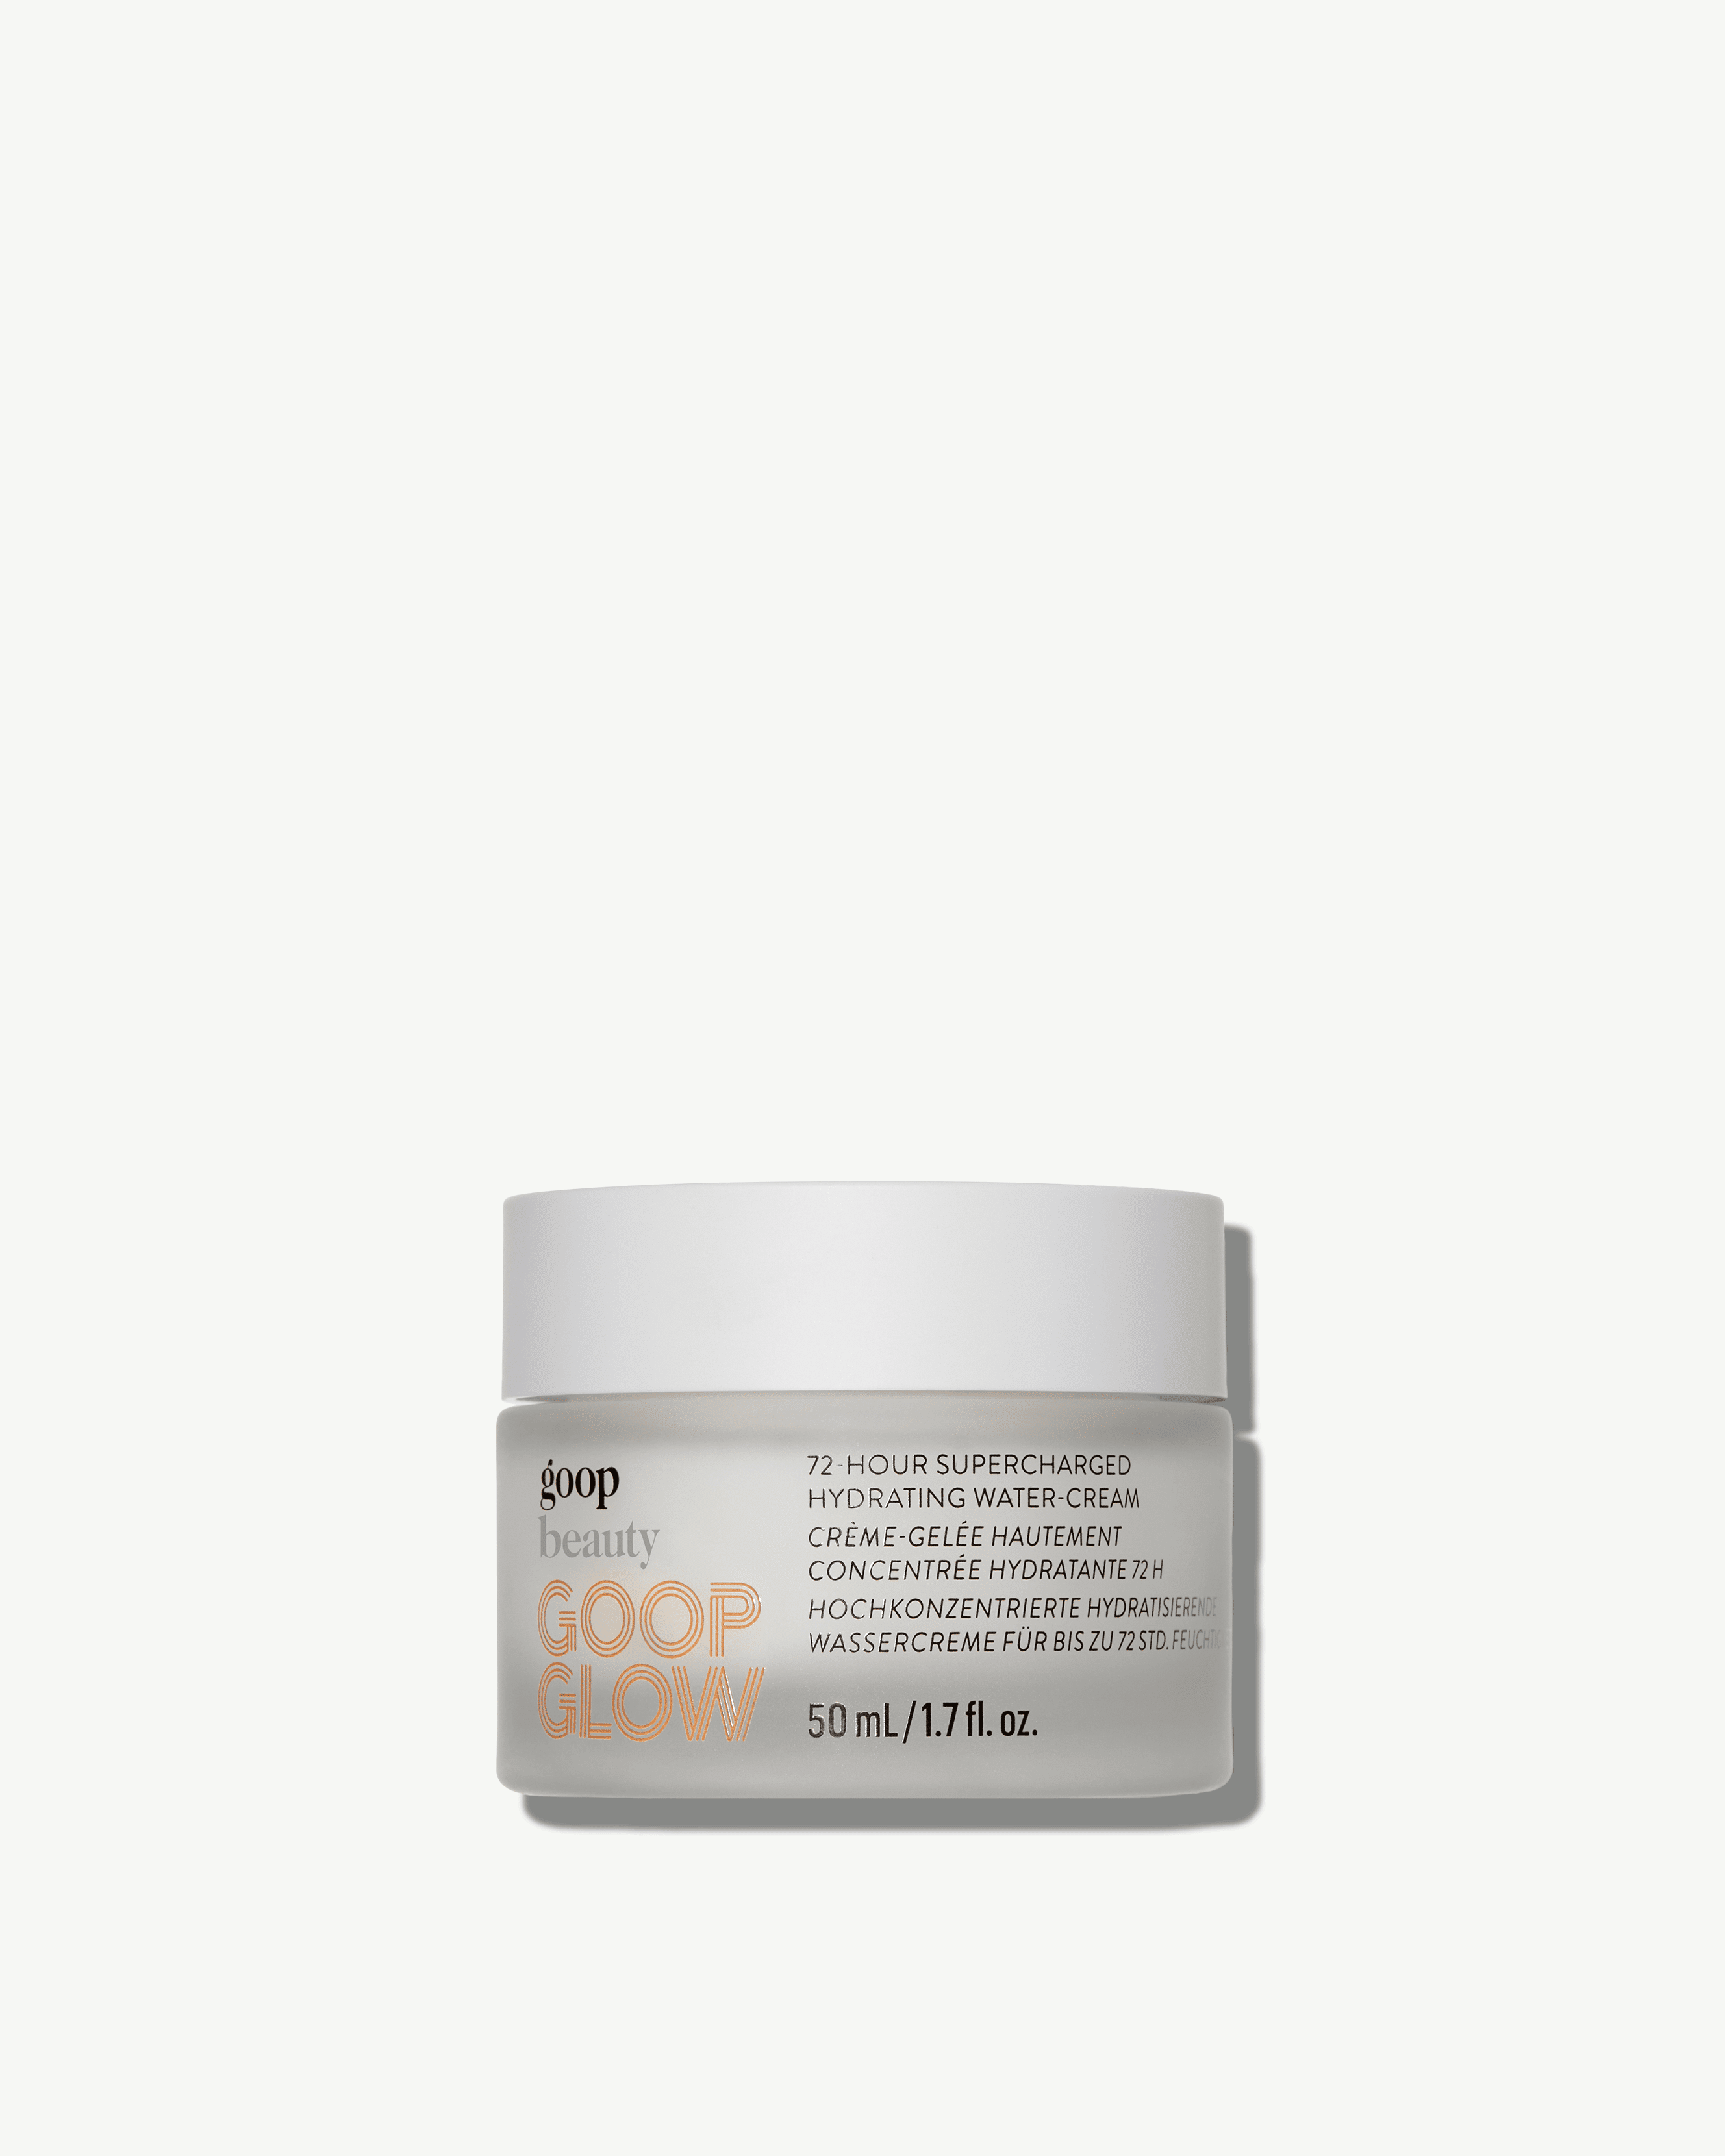 Goop 72-hour Supercharged Hydrating Water-cream